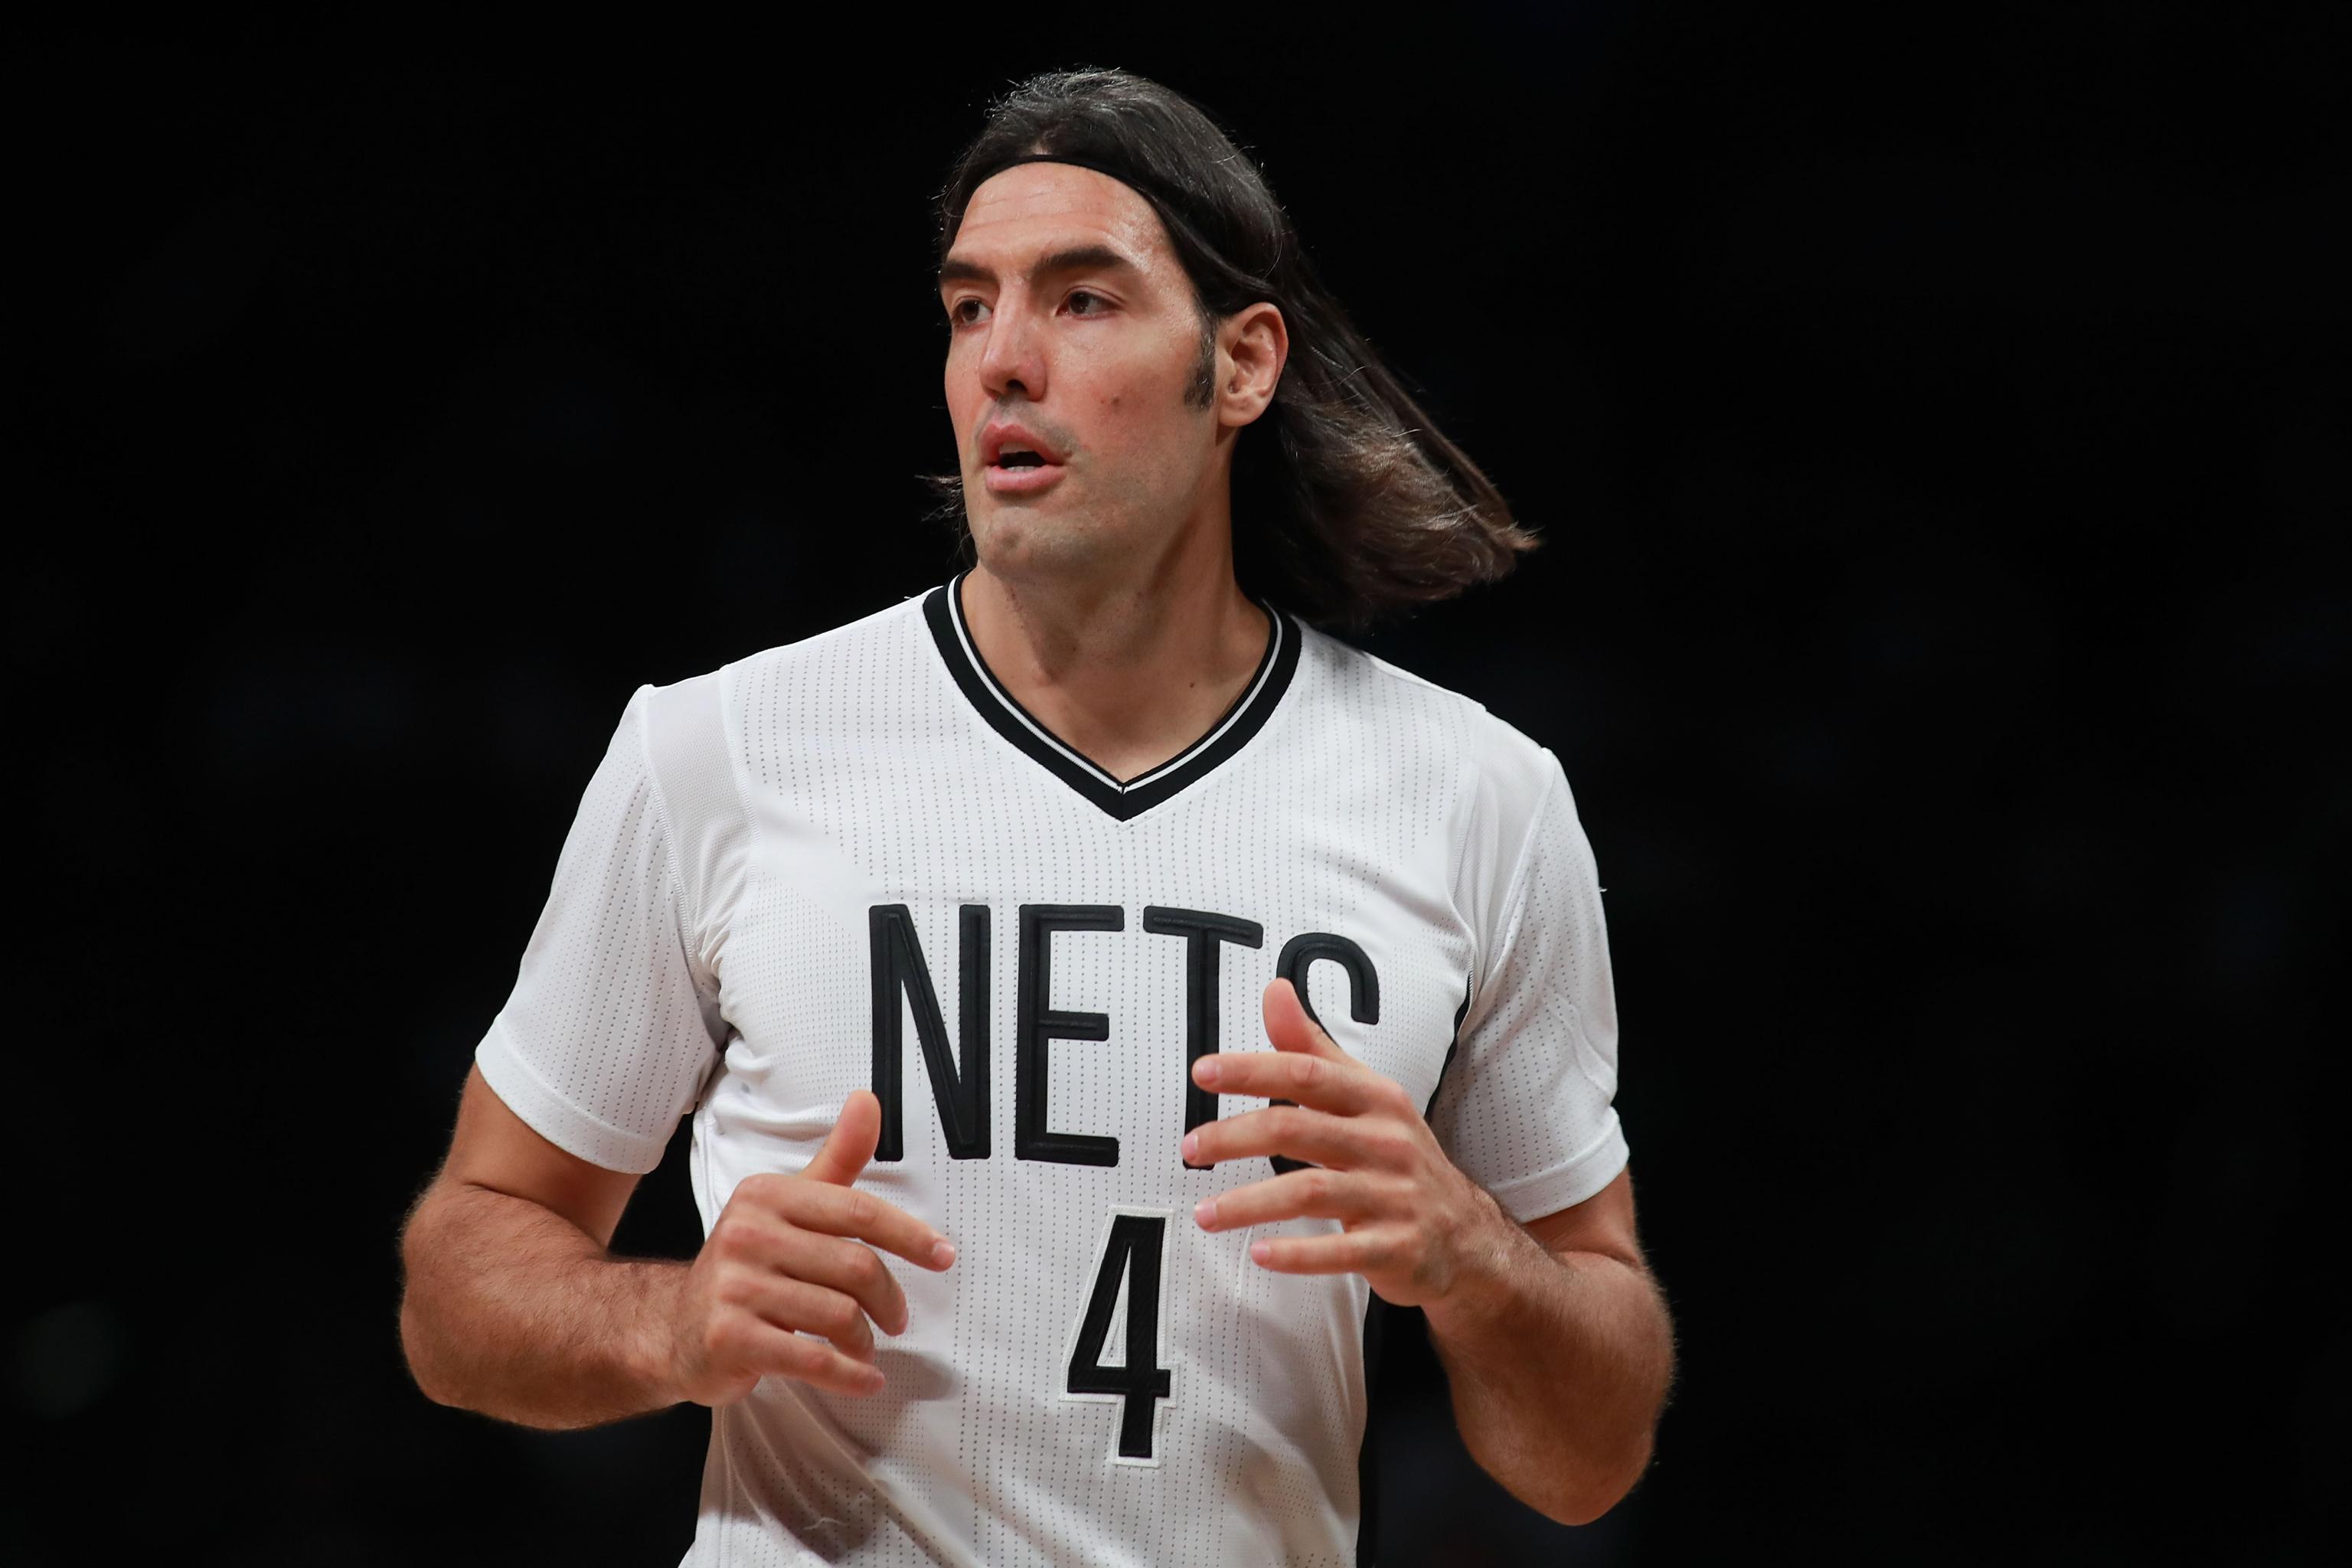 What other owner is playing full court?': Luis Scola's transition